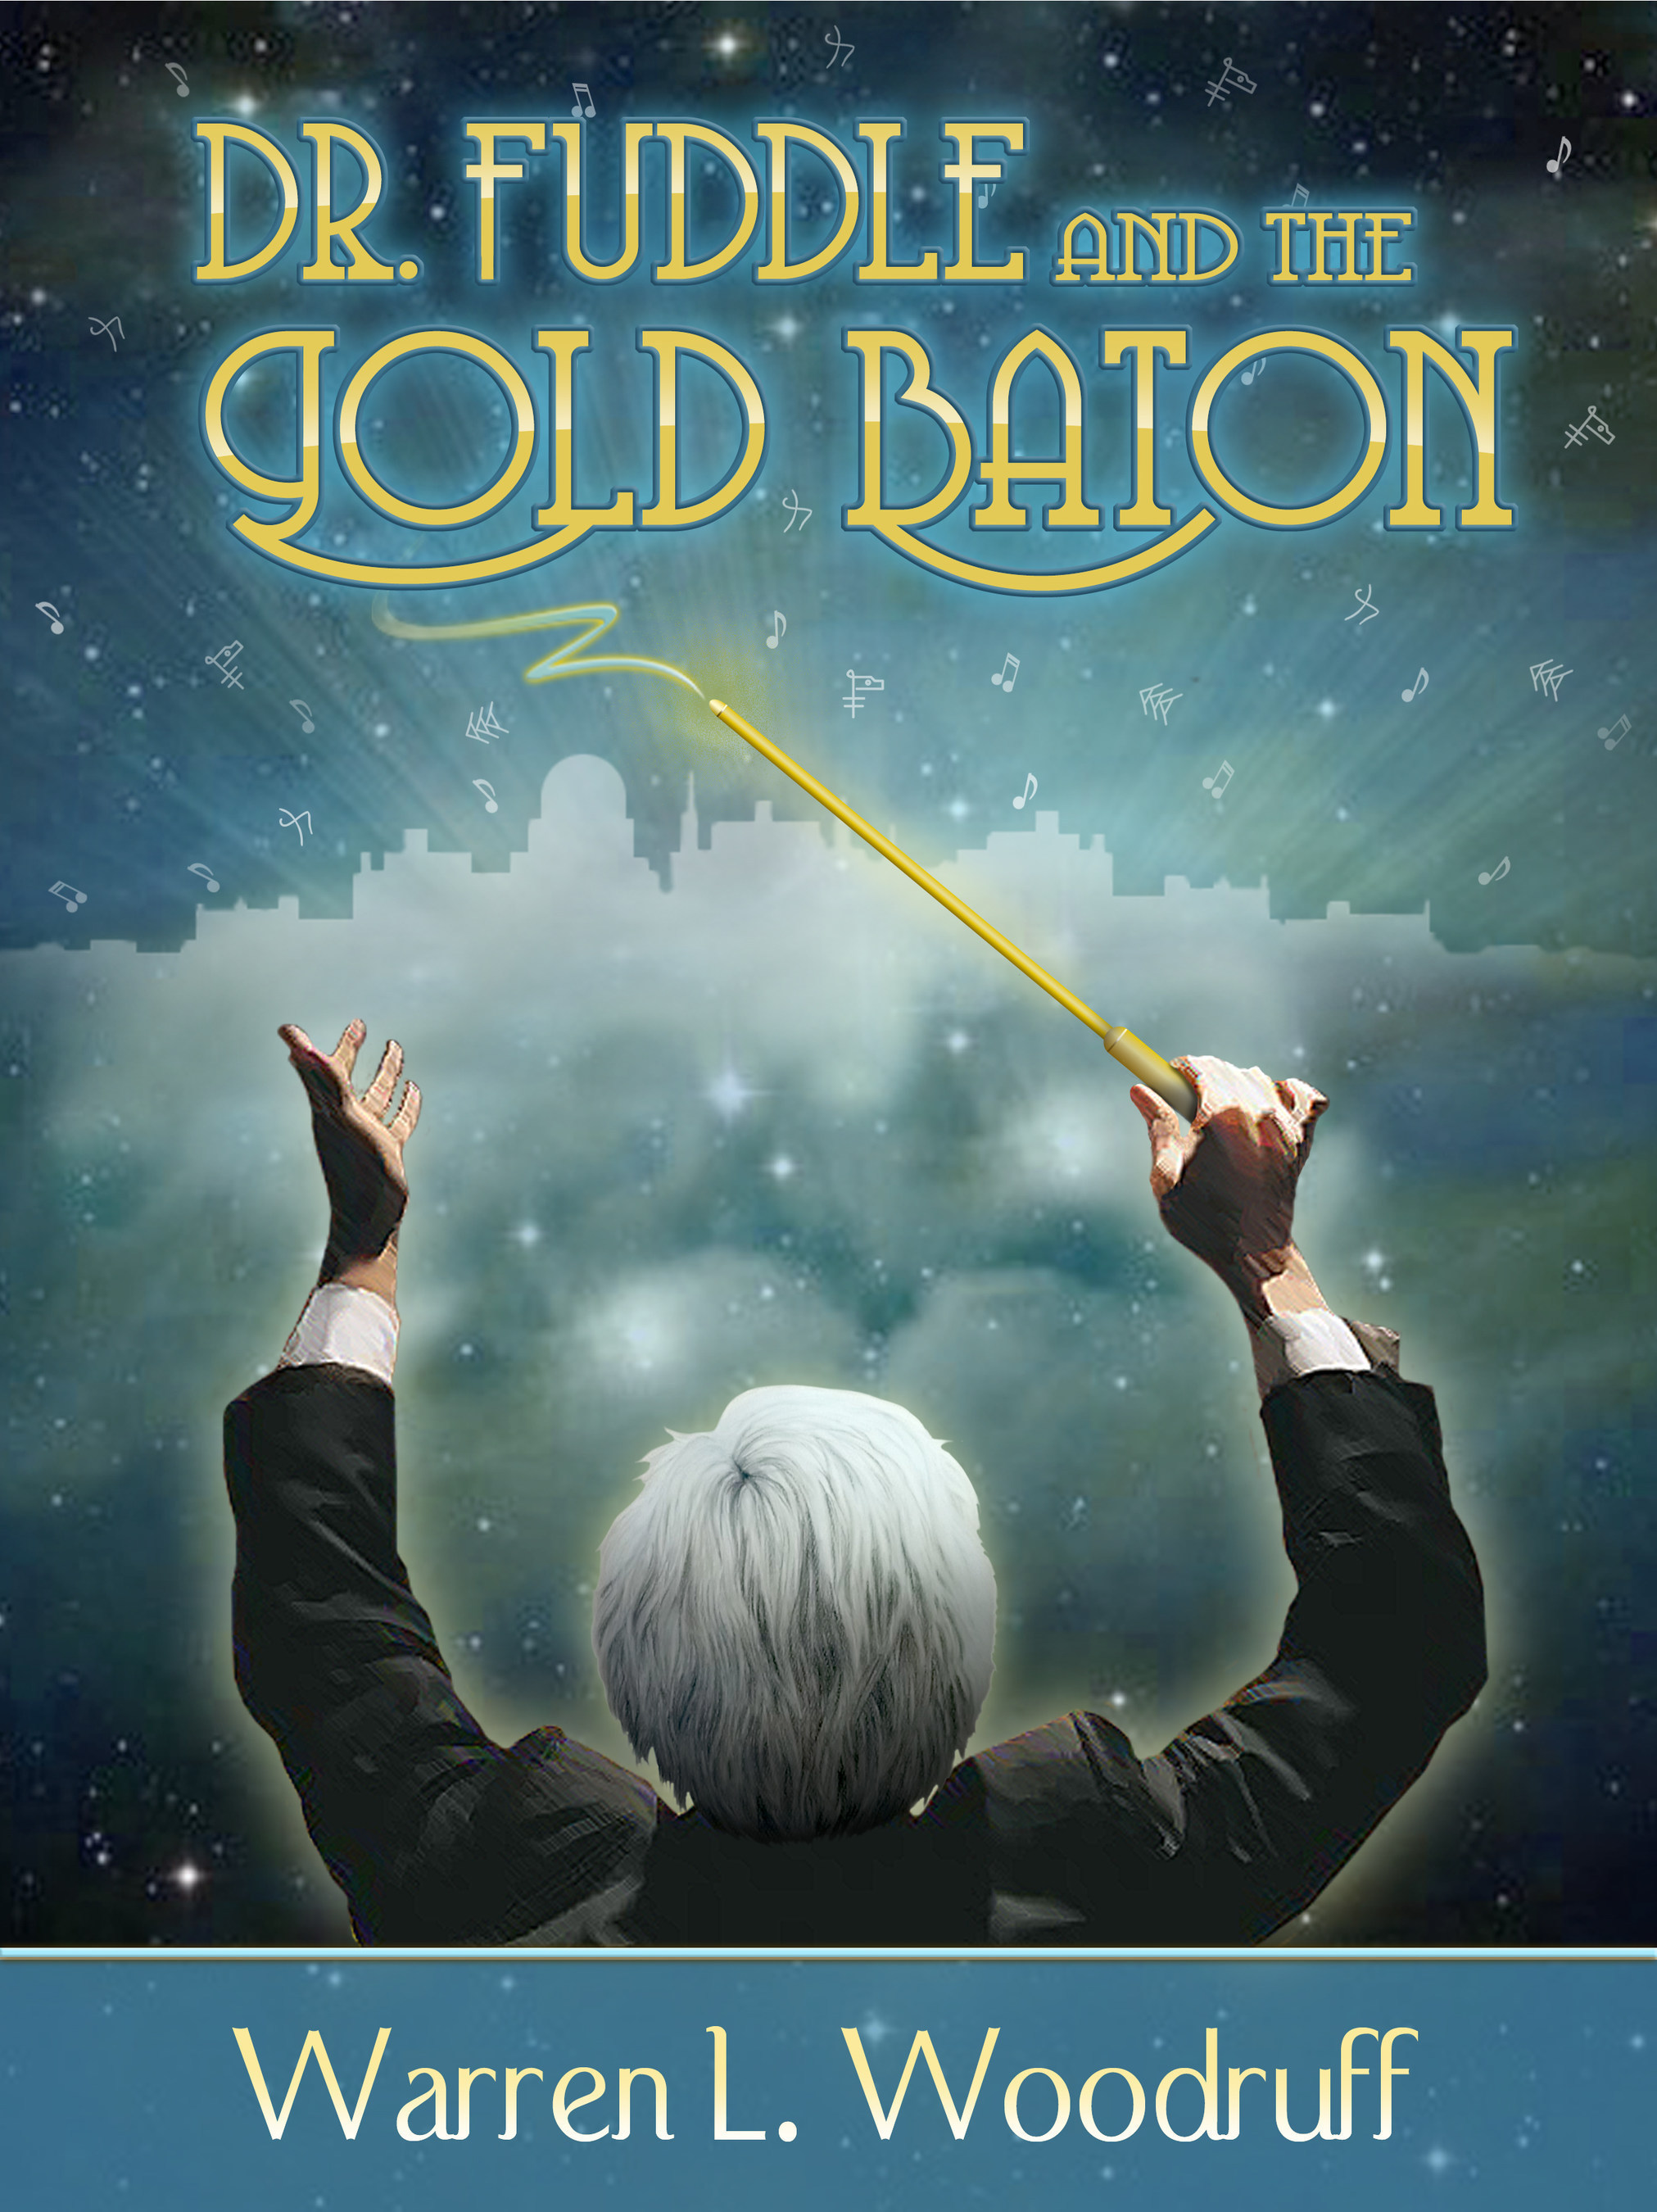 Dr. Fuddle and the Gold Baton by Dr. Warren L. Woodruff